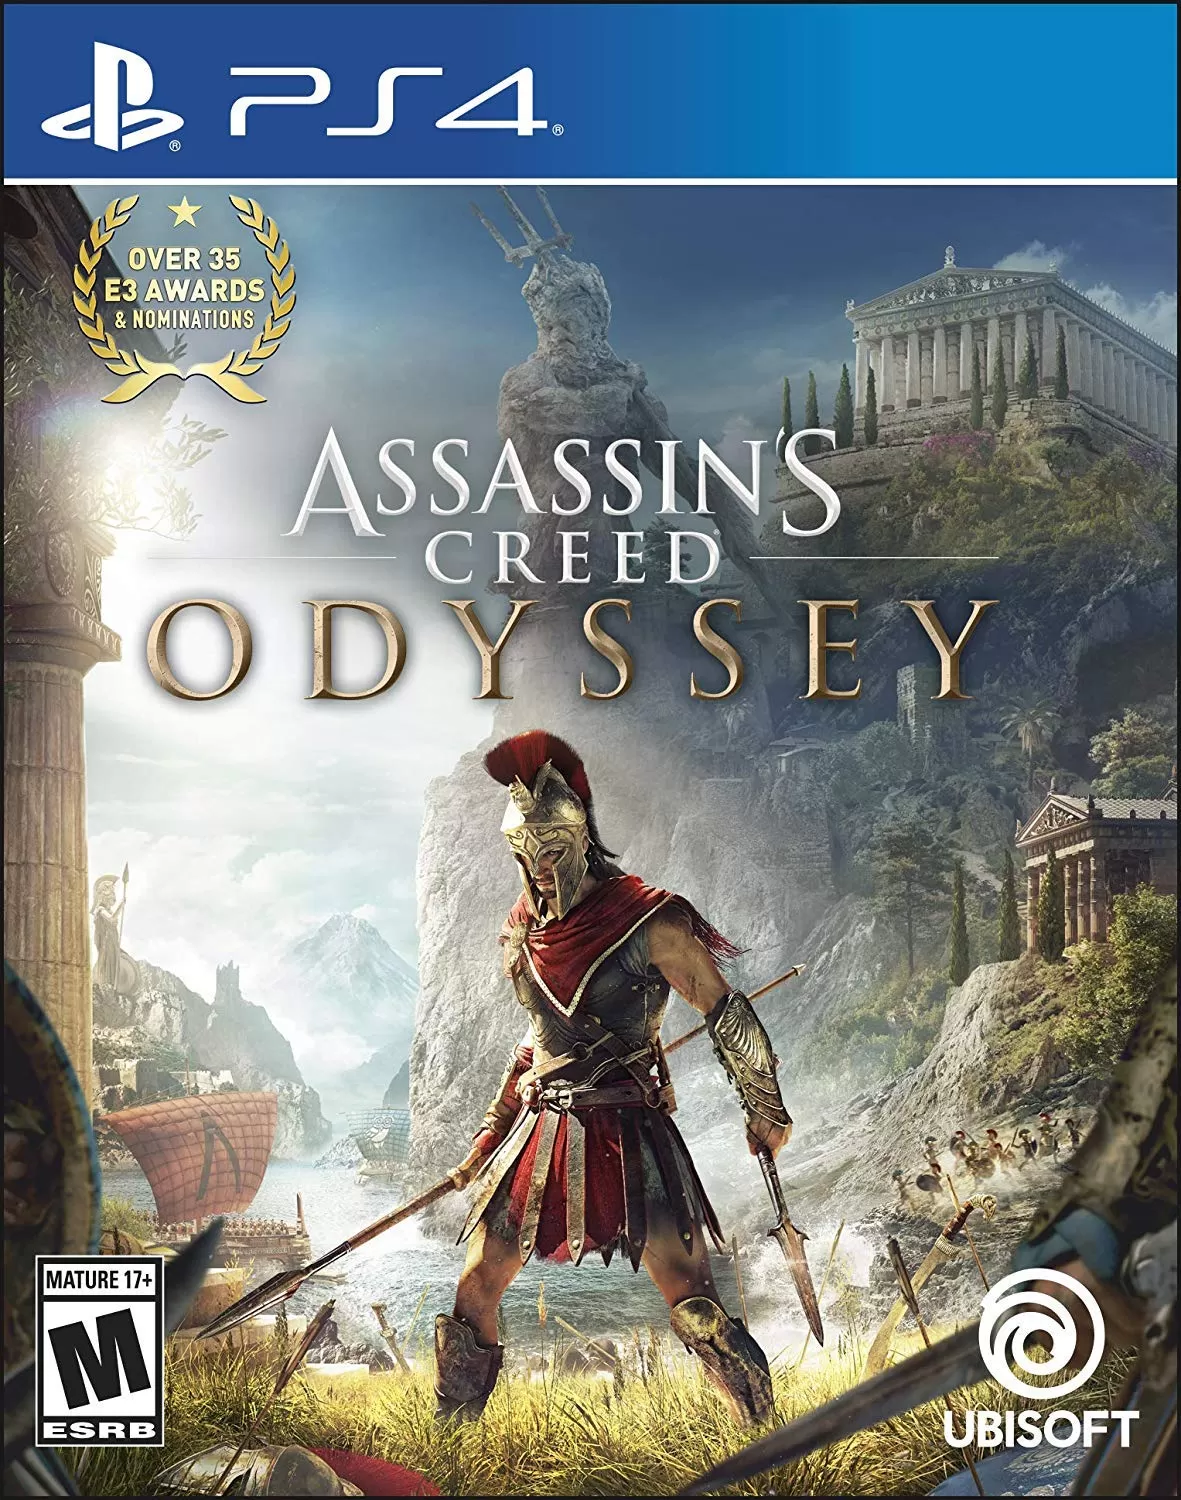 Ubisoft Assassin's creed odyssey standard edition - ps4